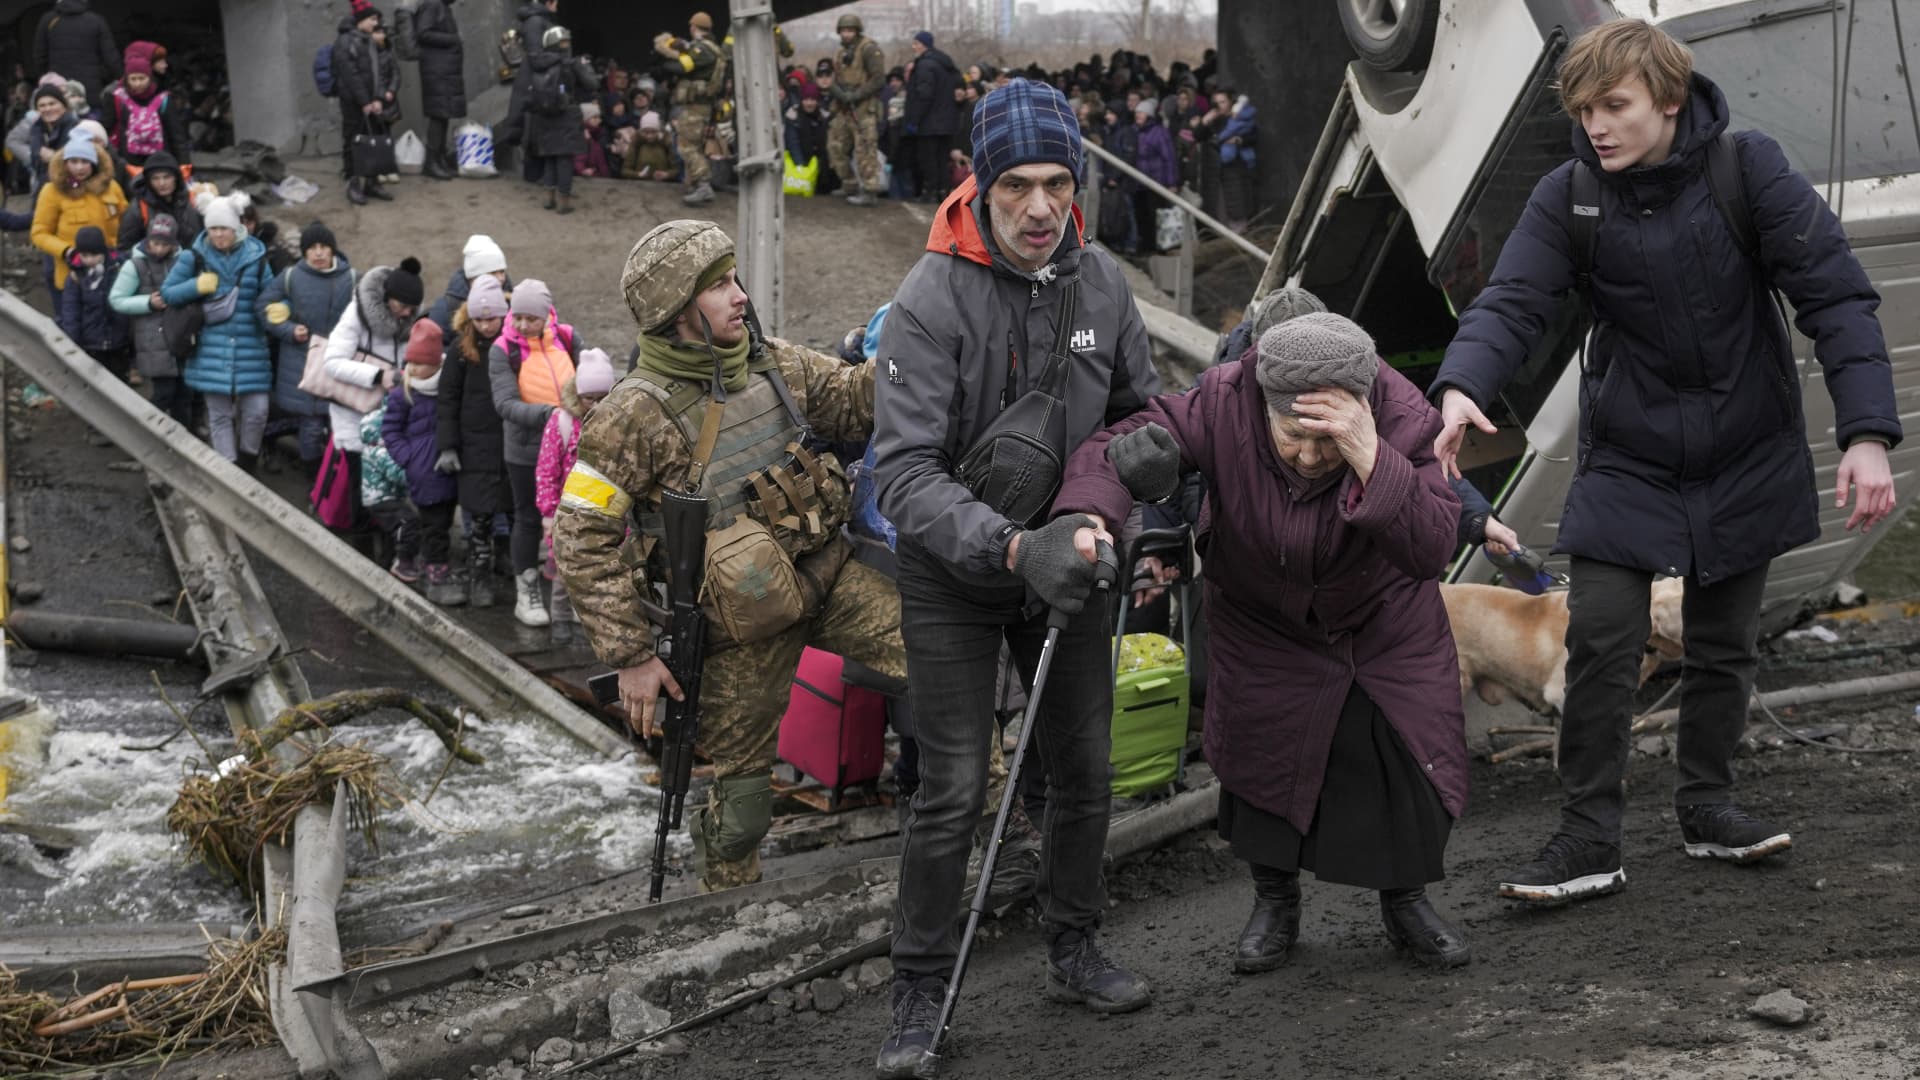 An elderly lady is assisted while crossing the Irpin river, under a bridge that was destroyed by a Russian airstrike, as civilians flee the town of Irpin, Ukraine, Saturday, March 5, 2022.